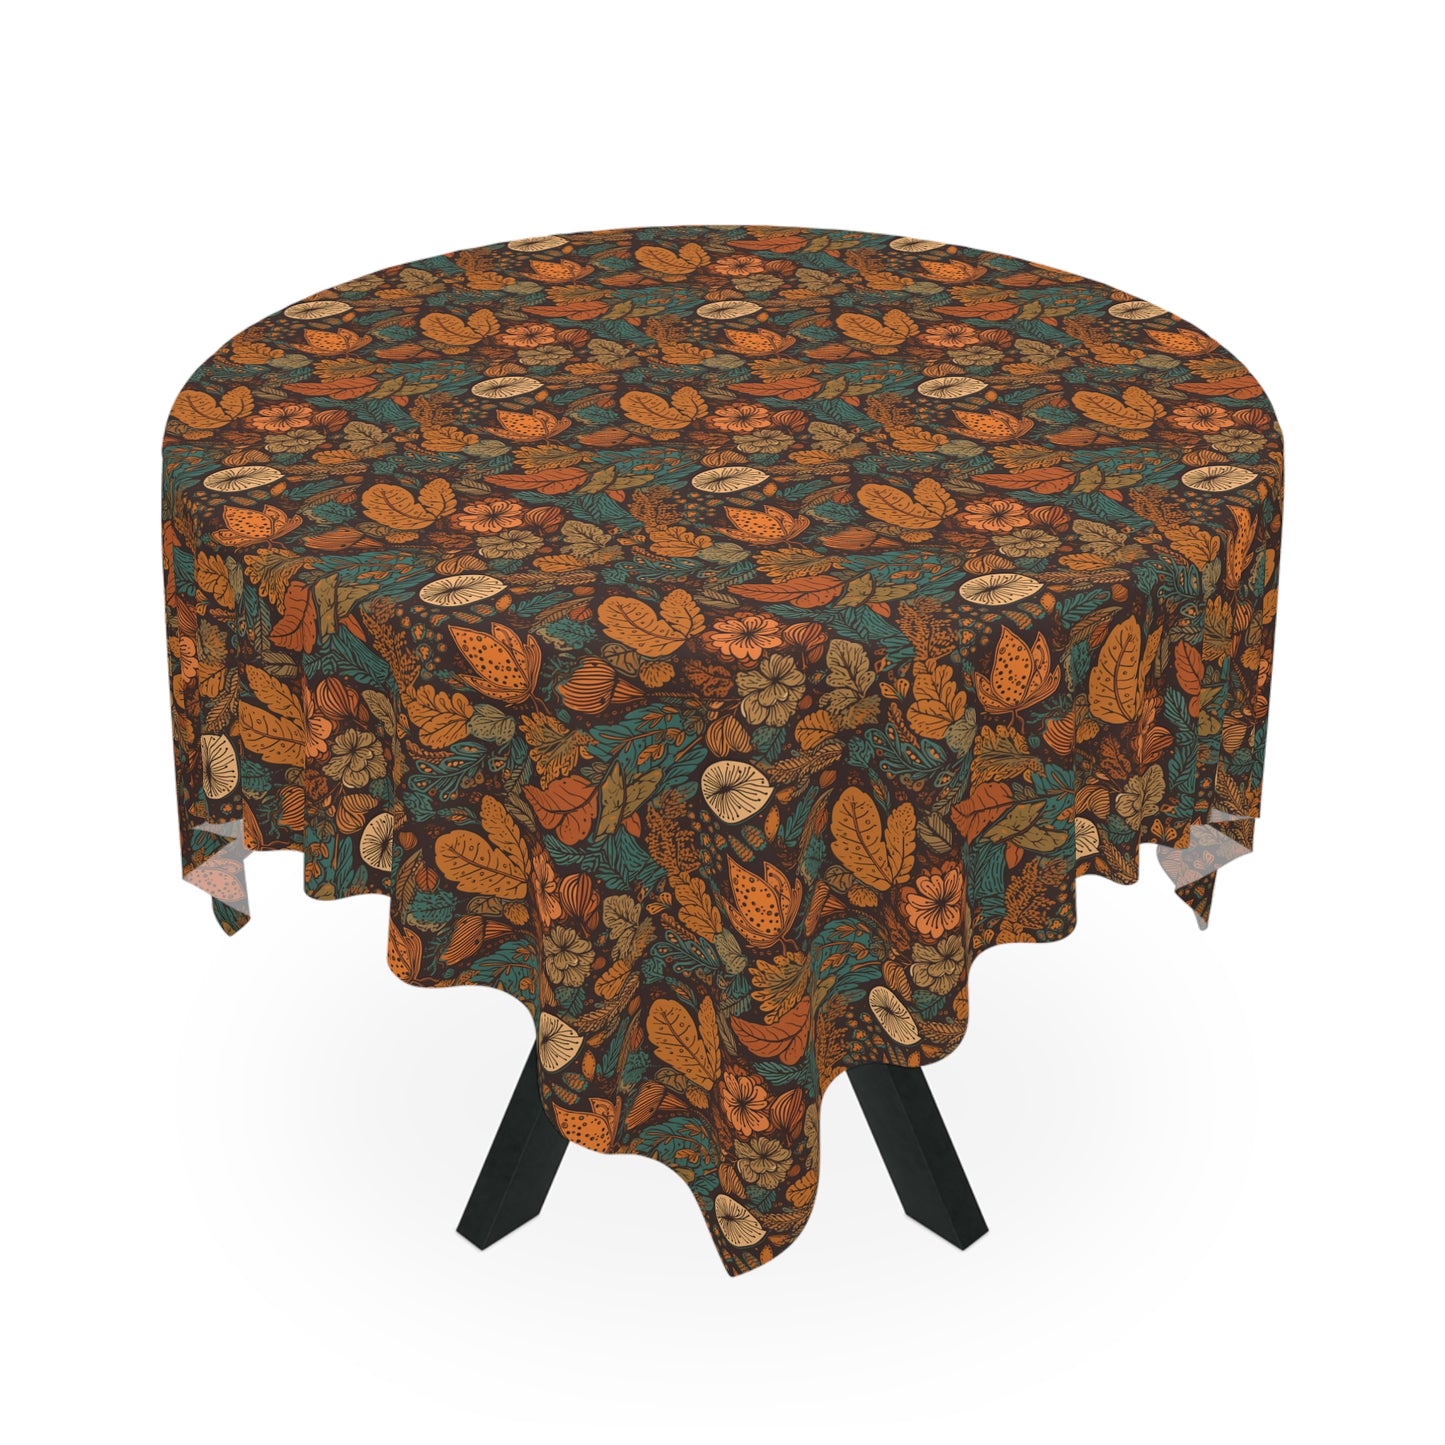 Tablecloth (Moody Harvest)